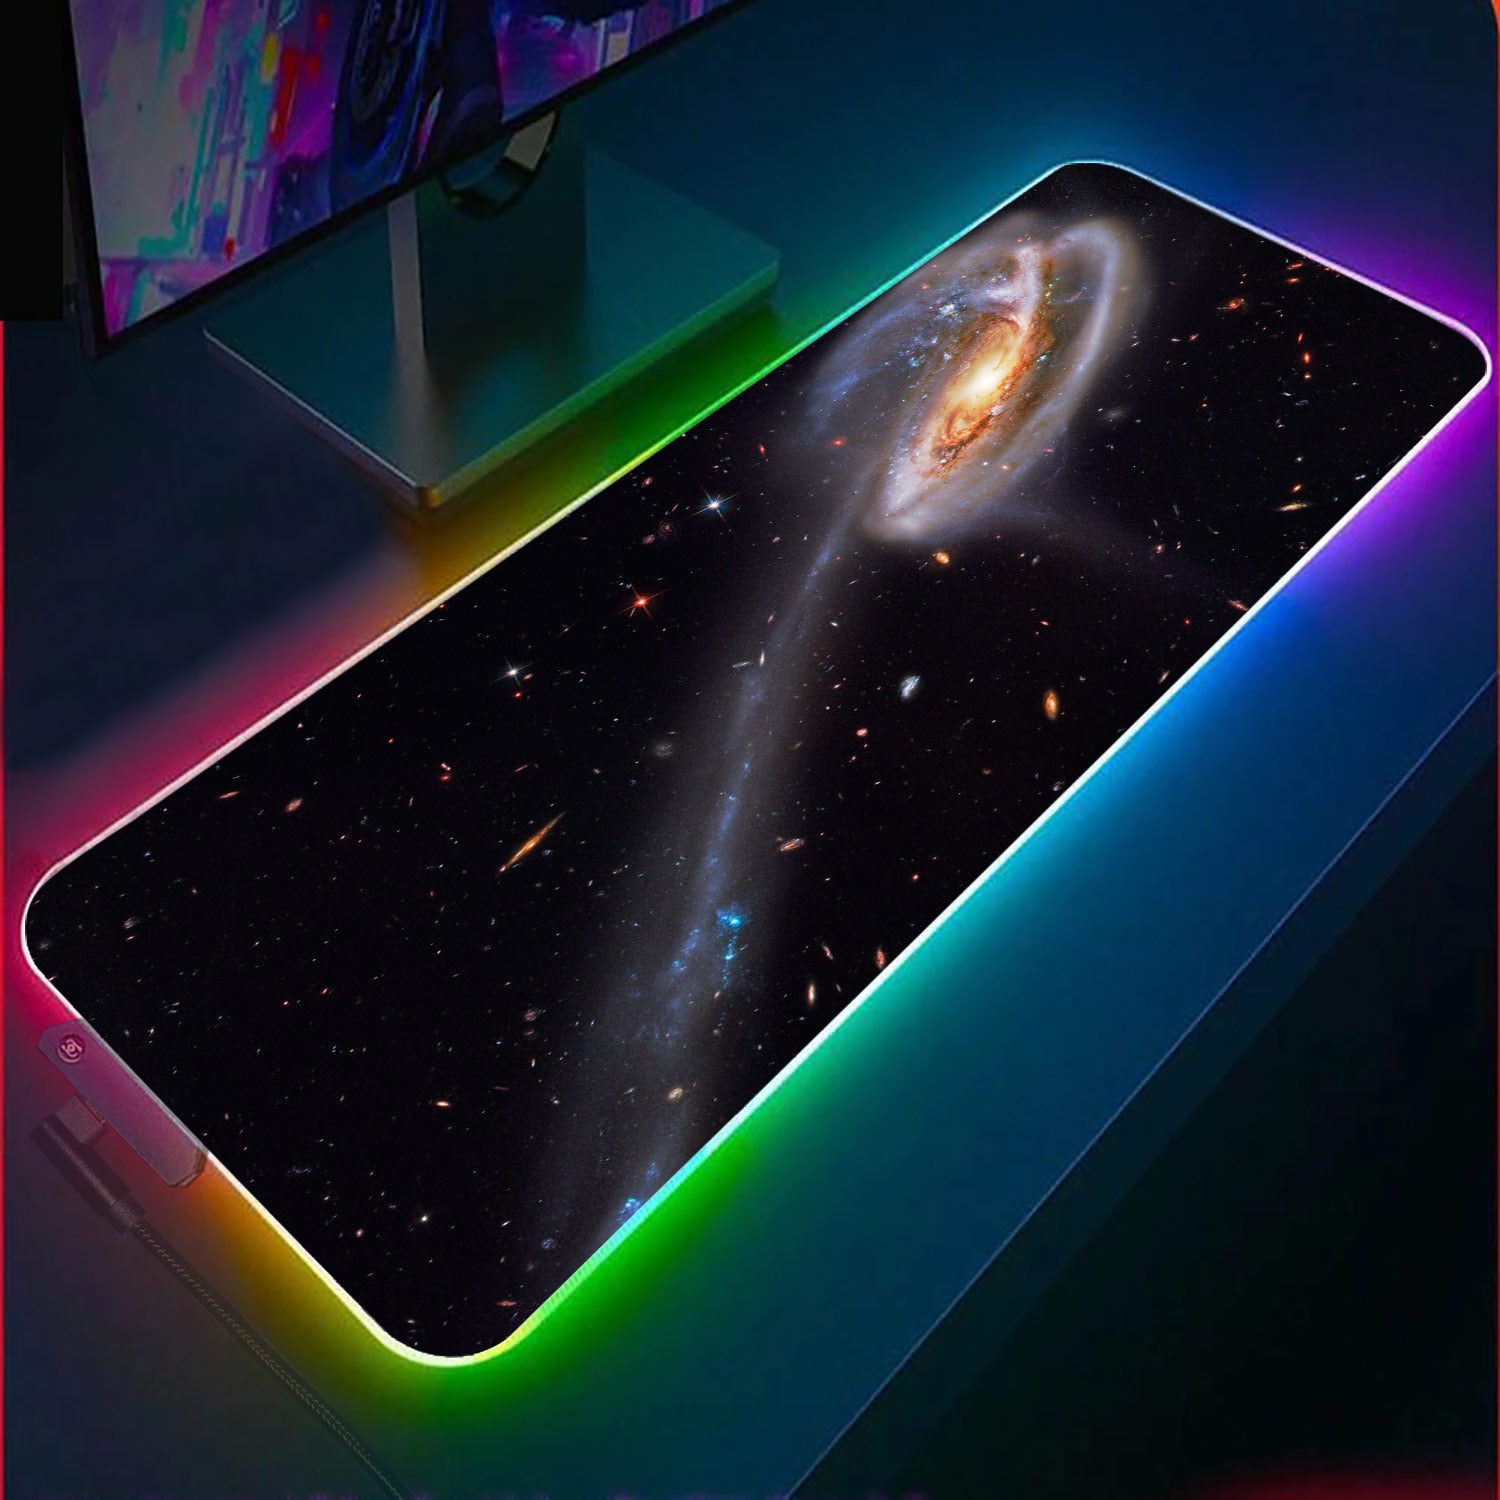 Space Art RGB Gaming Mouse Pad